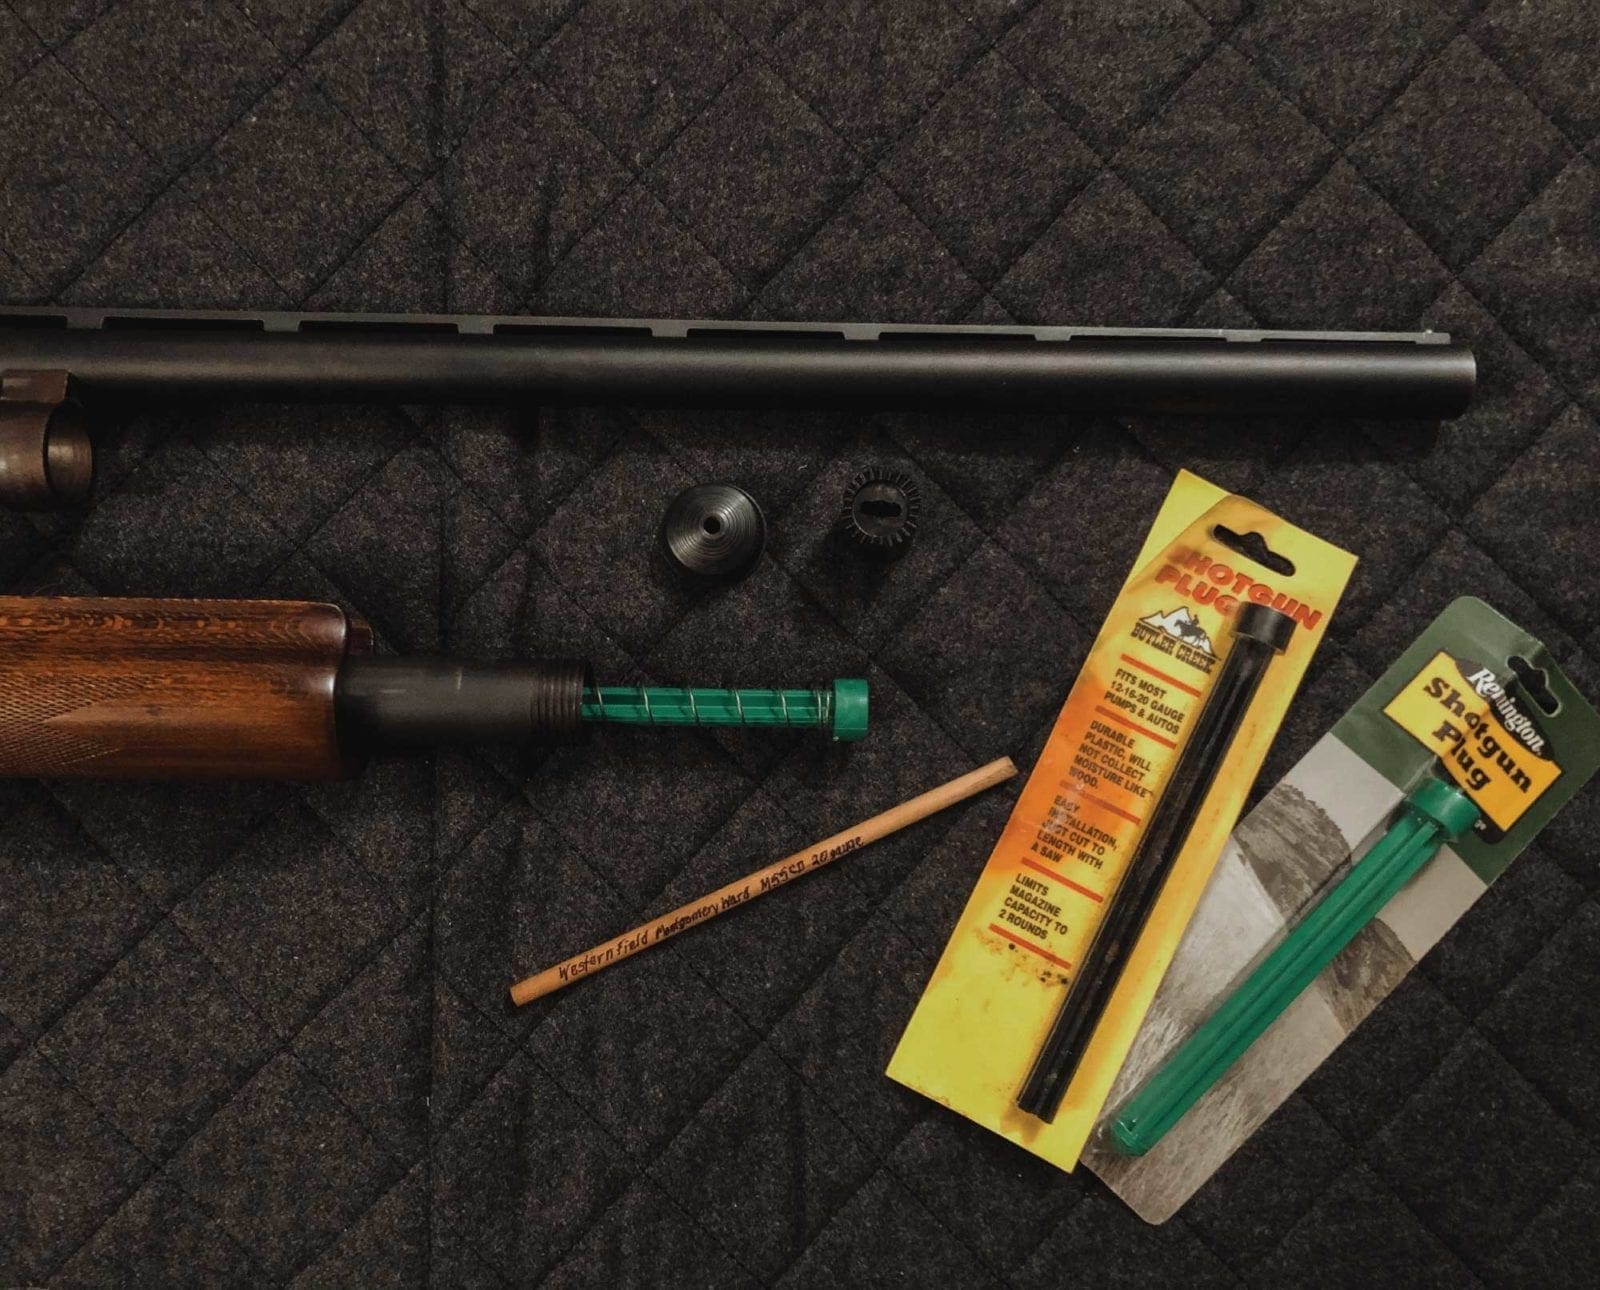 A disassembled shotgun with factory and wooden plugs